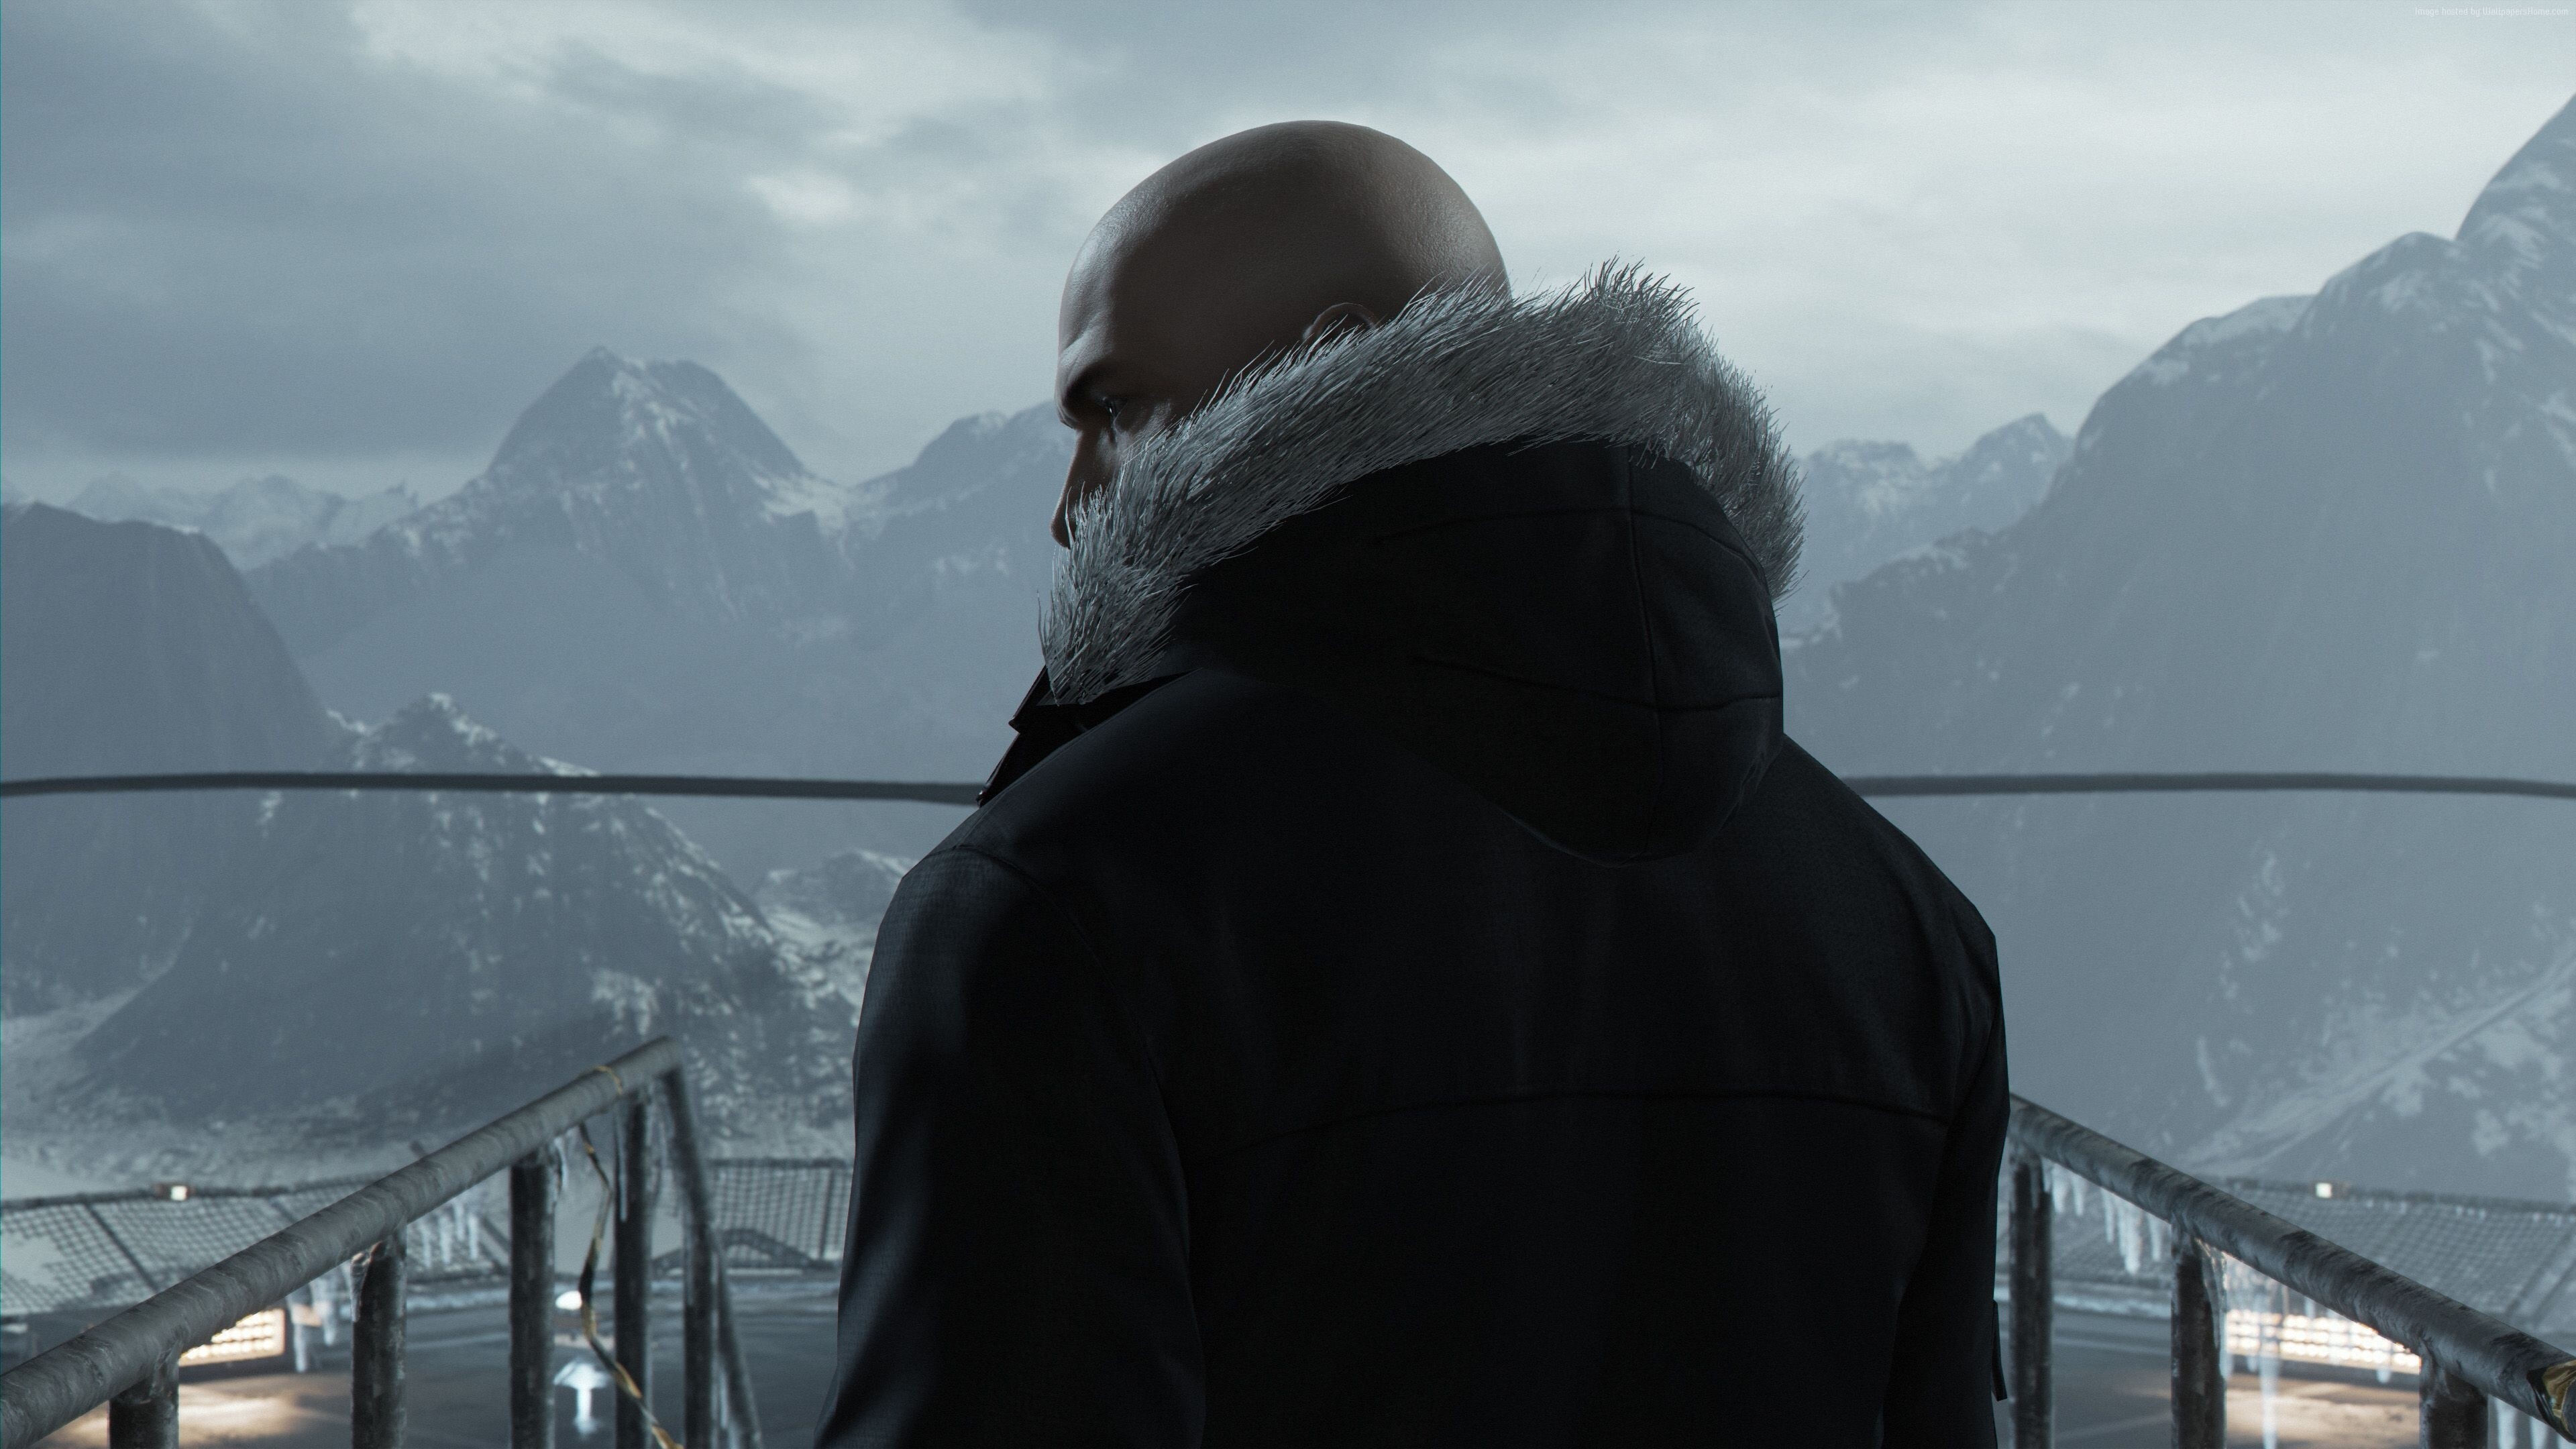 Hitman game, HD wallpapers, Stealthy assassin, Gaming background, 3840x2160 4K Desktop